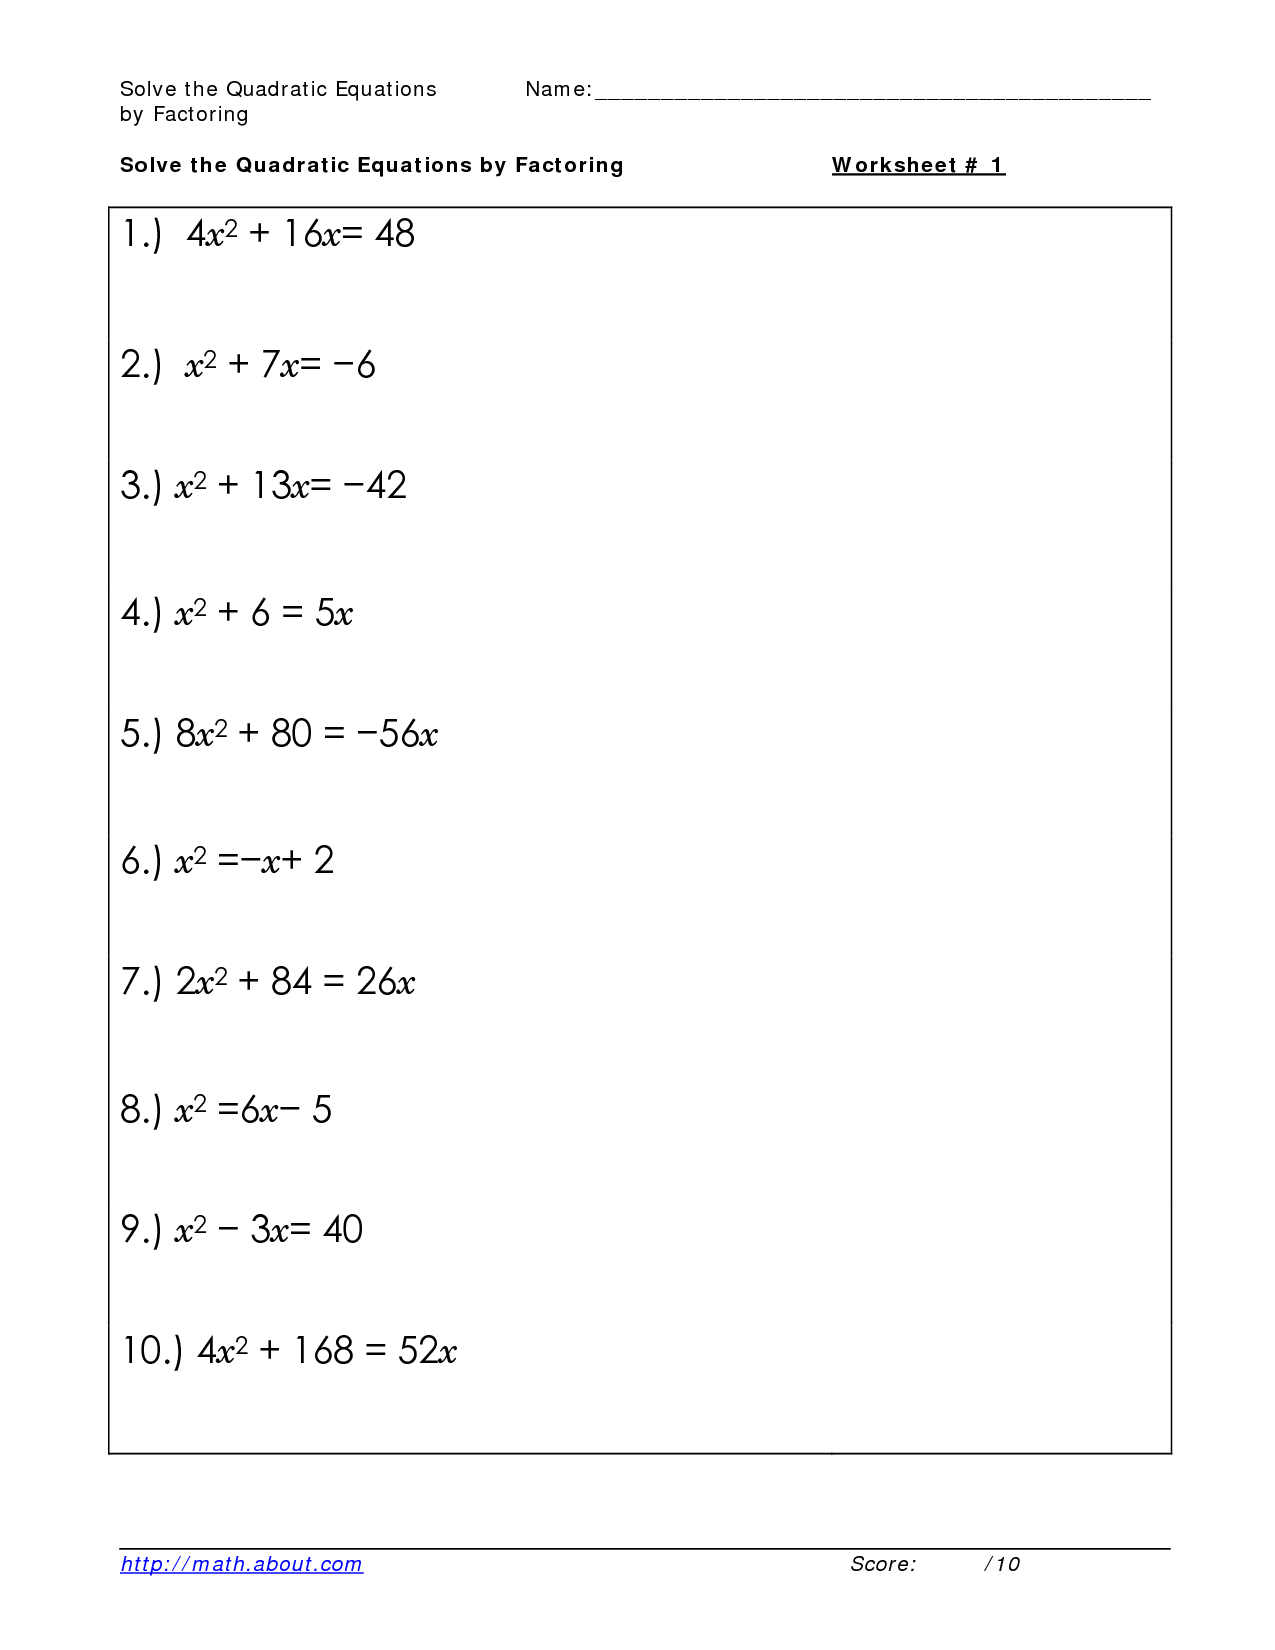 Solving Quadratic Equations by Factoring Worksheet Image